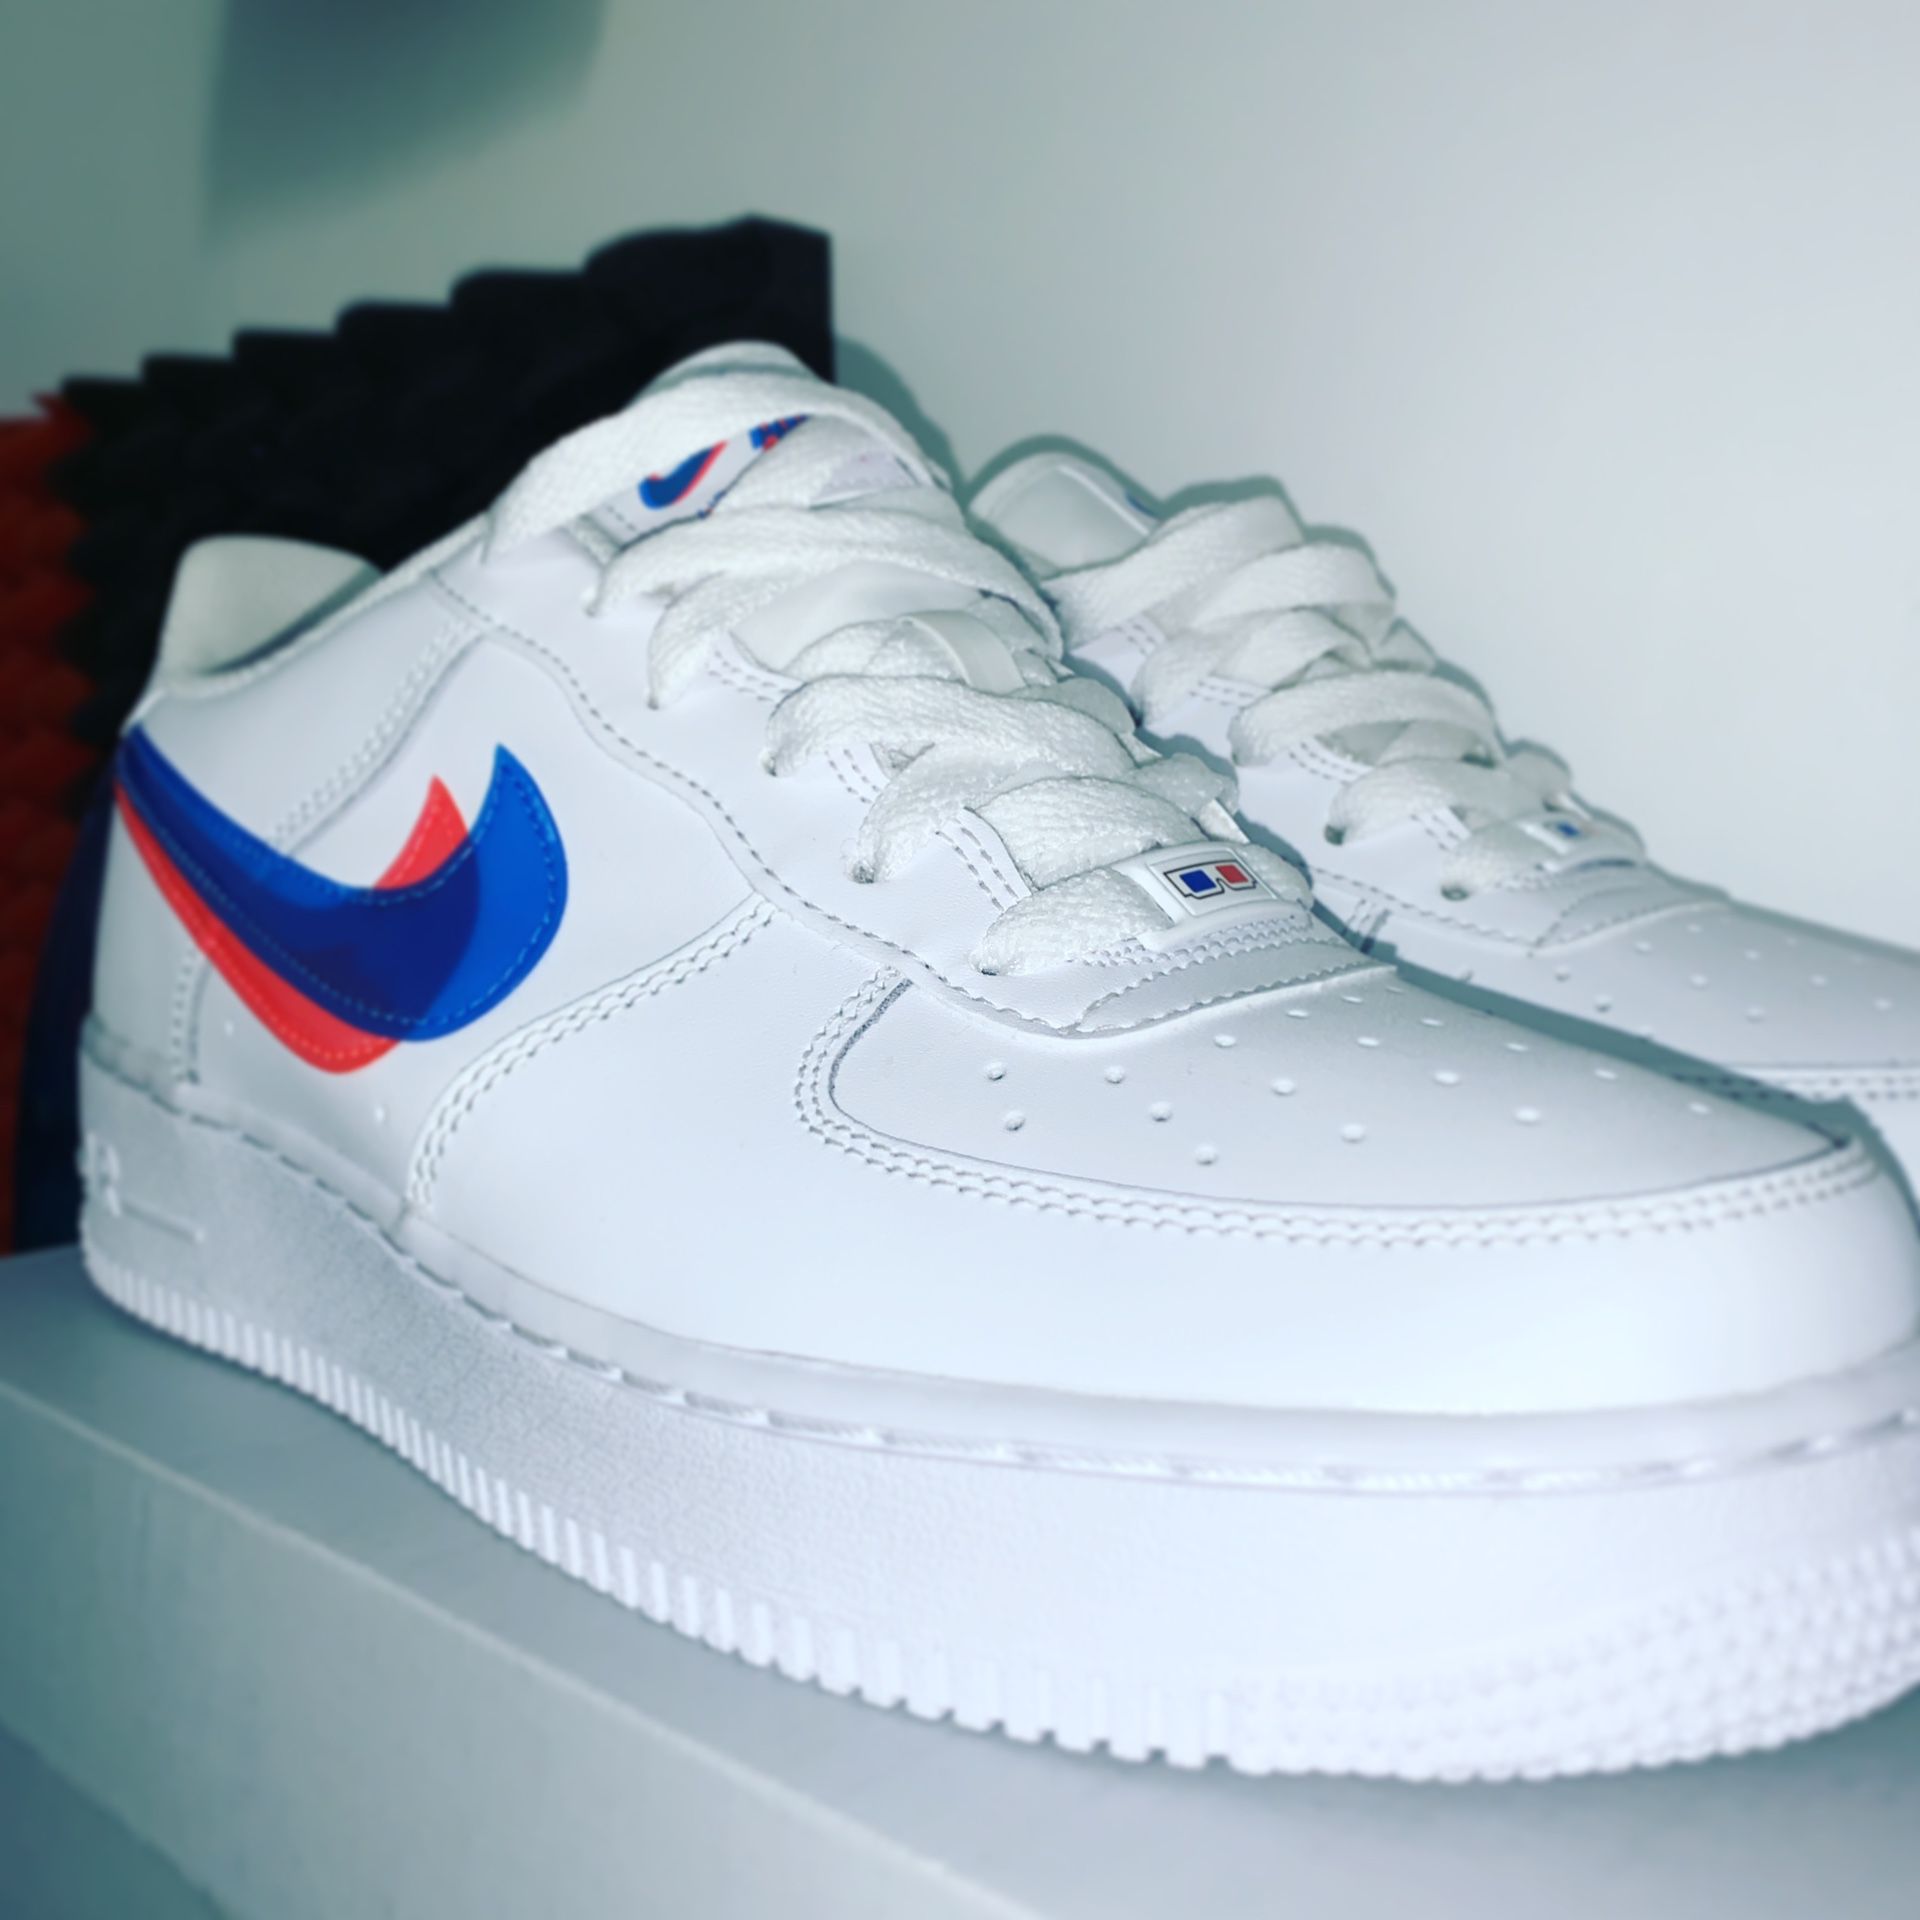 Nike Air Force 1 (3 D) special version Size 7